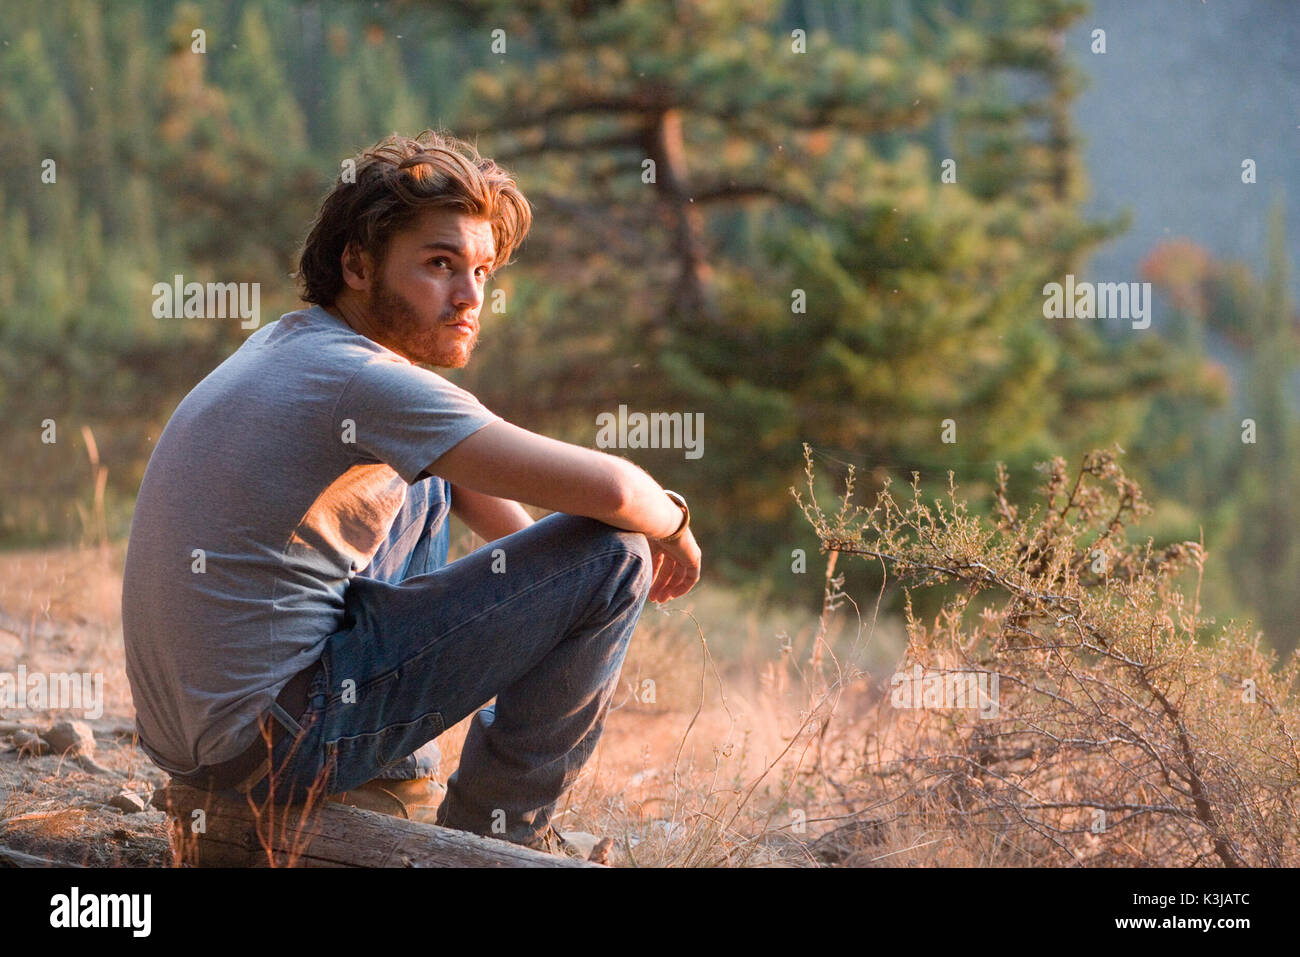 INTO THE WILD EMILE HIRSCH INTO THE WILD     Date: 2007 Stock Photo